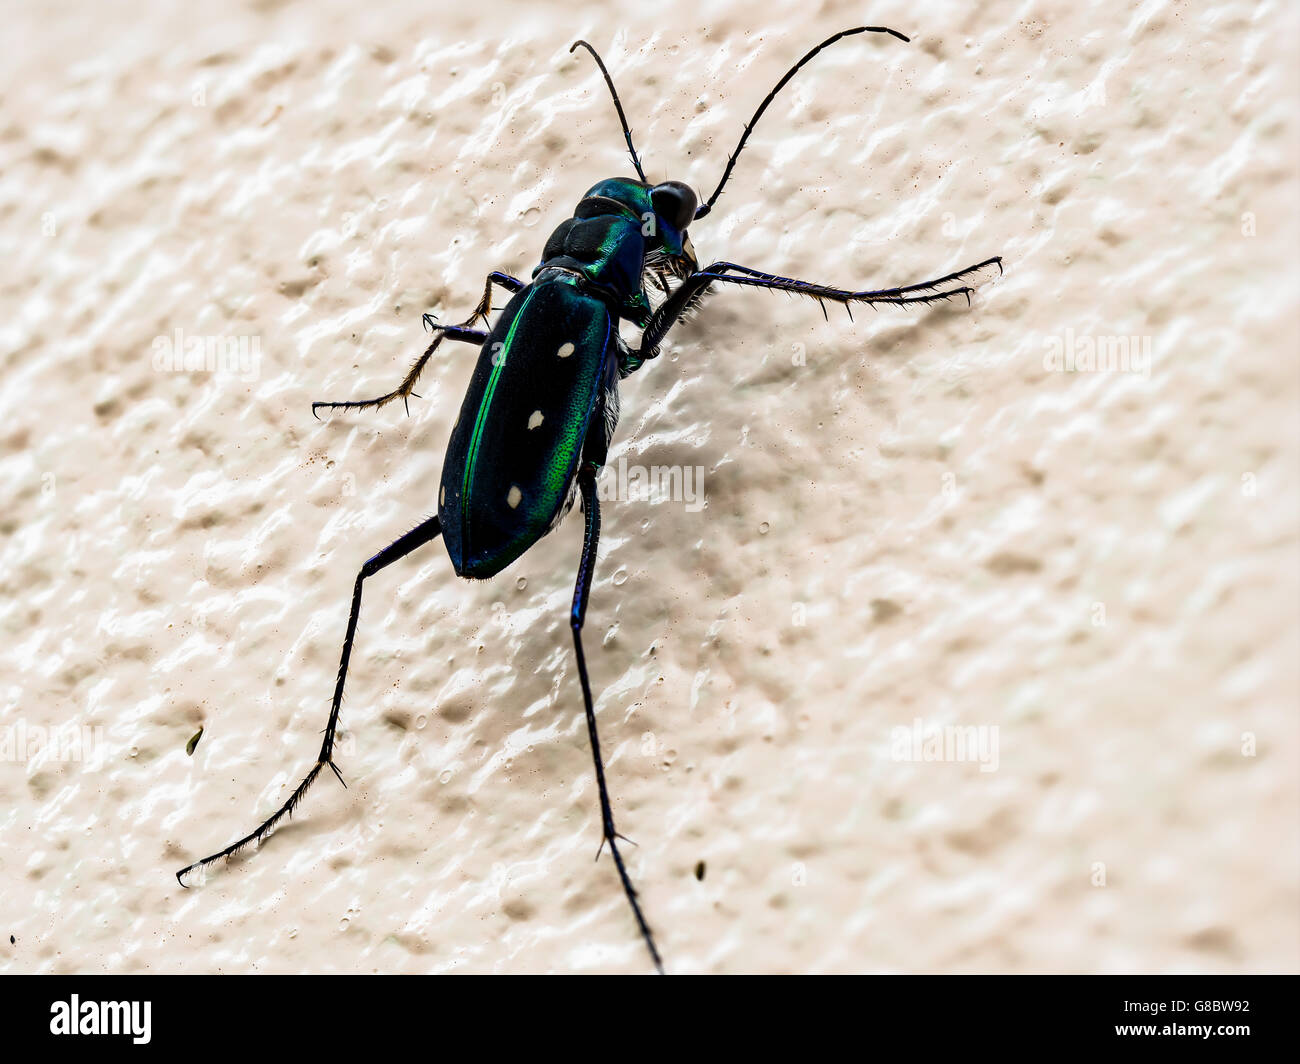 Tiger,beetle,insects,chrysalis,weevil,worm,caterpillar,animal,garden Stock Photo